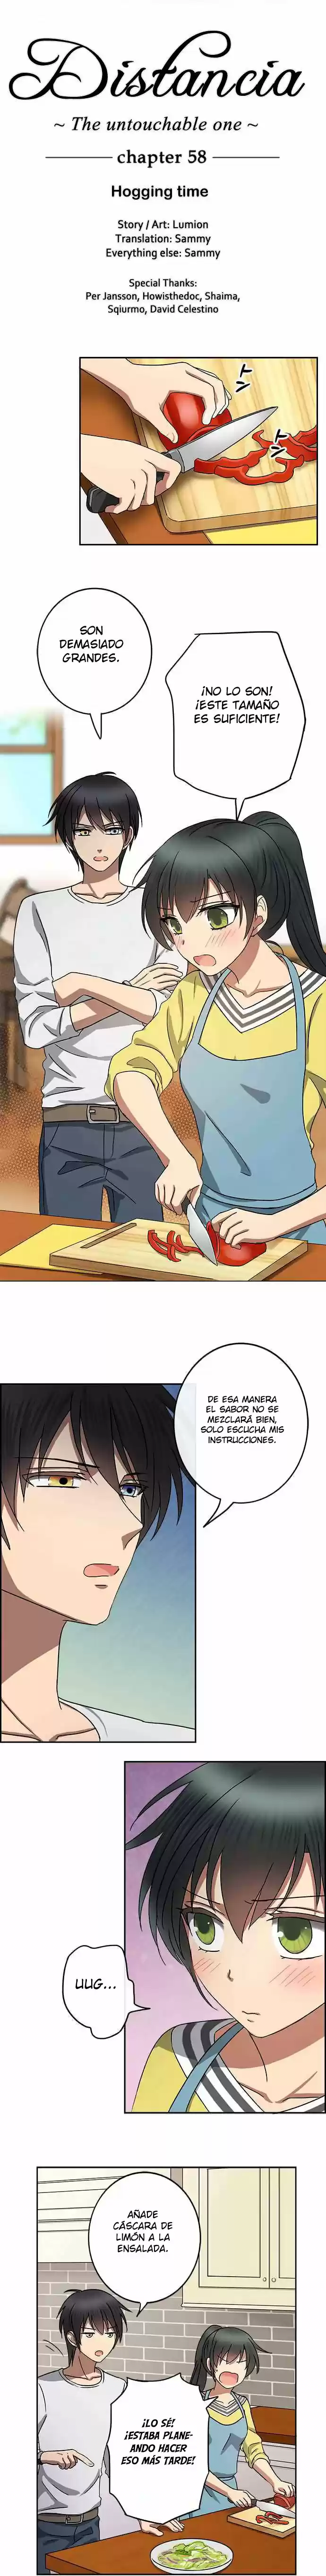 Distancia The Untouchable One: Chapter 58 - Page 1